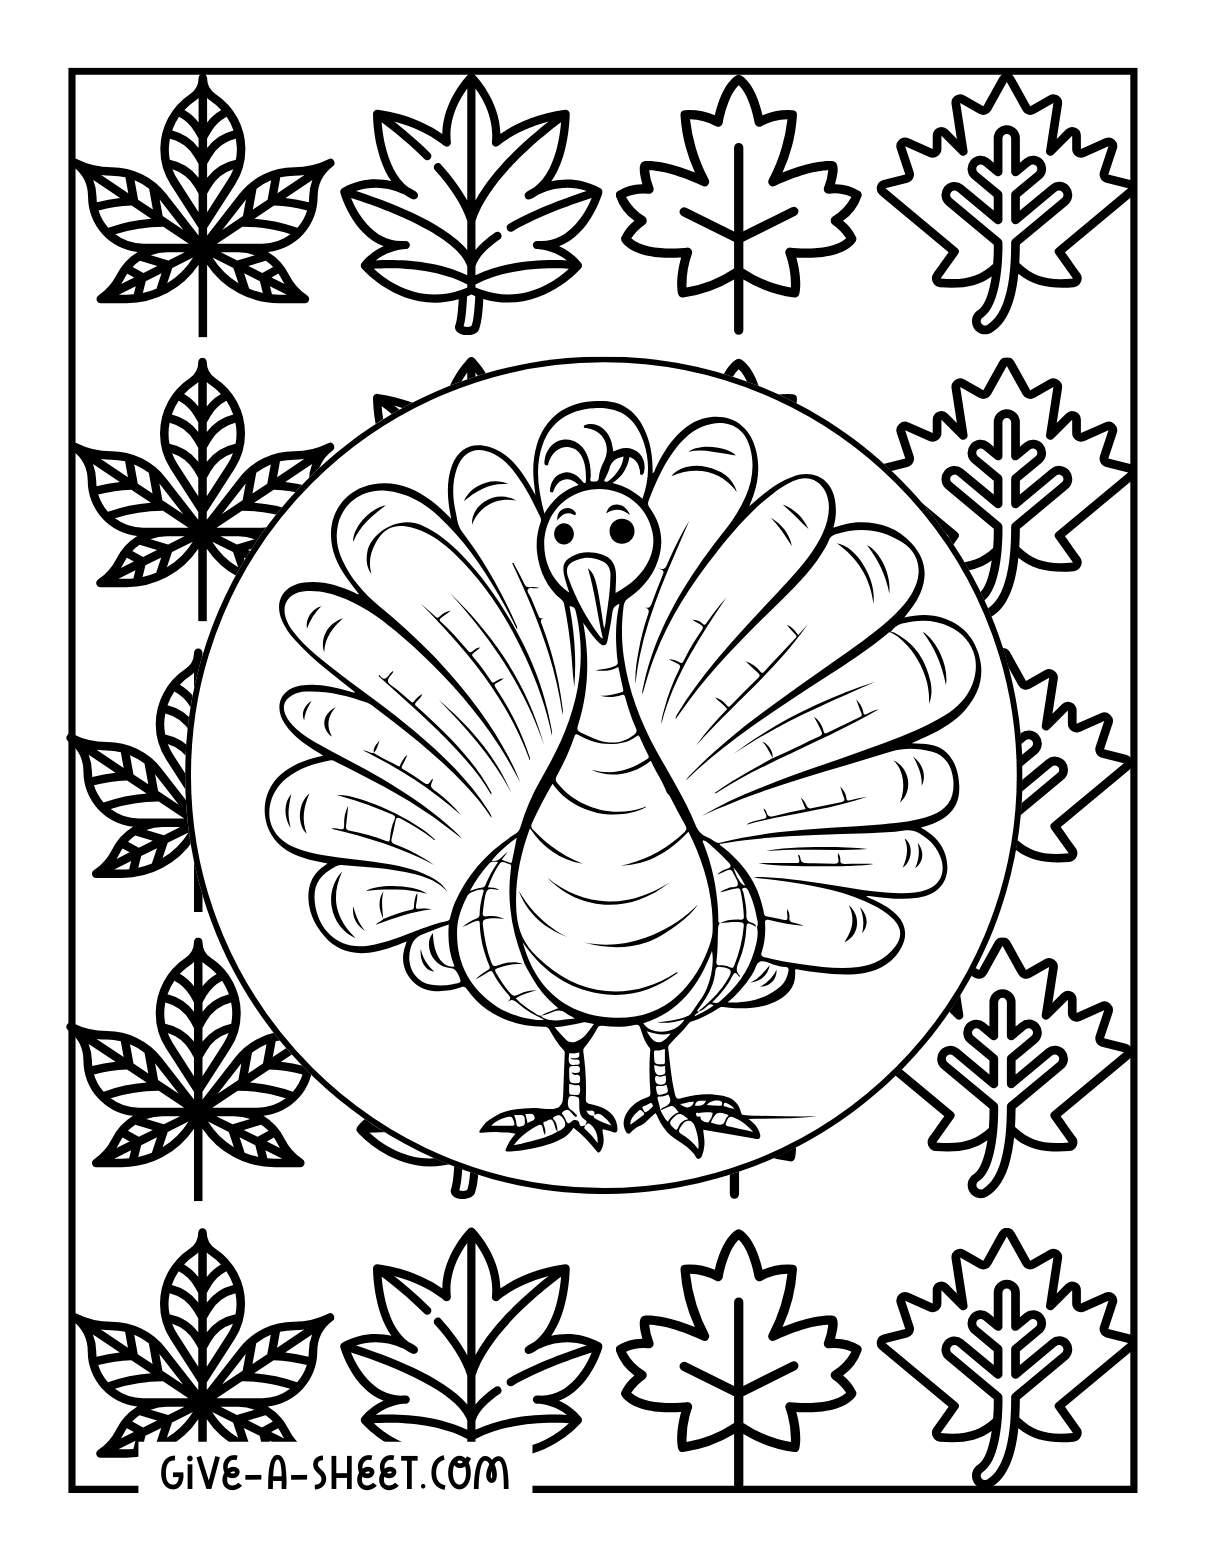 Wild turkey coloring pages with fall leaves.